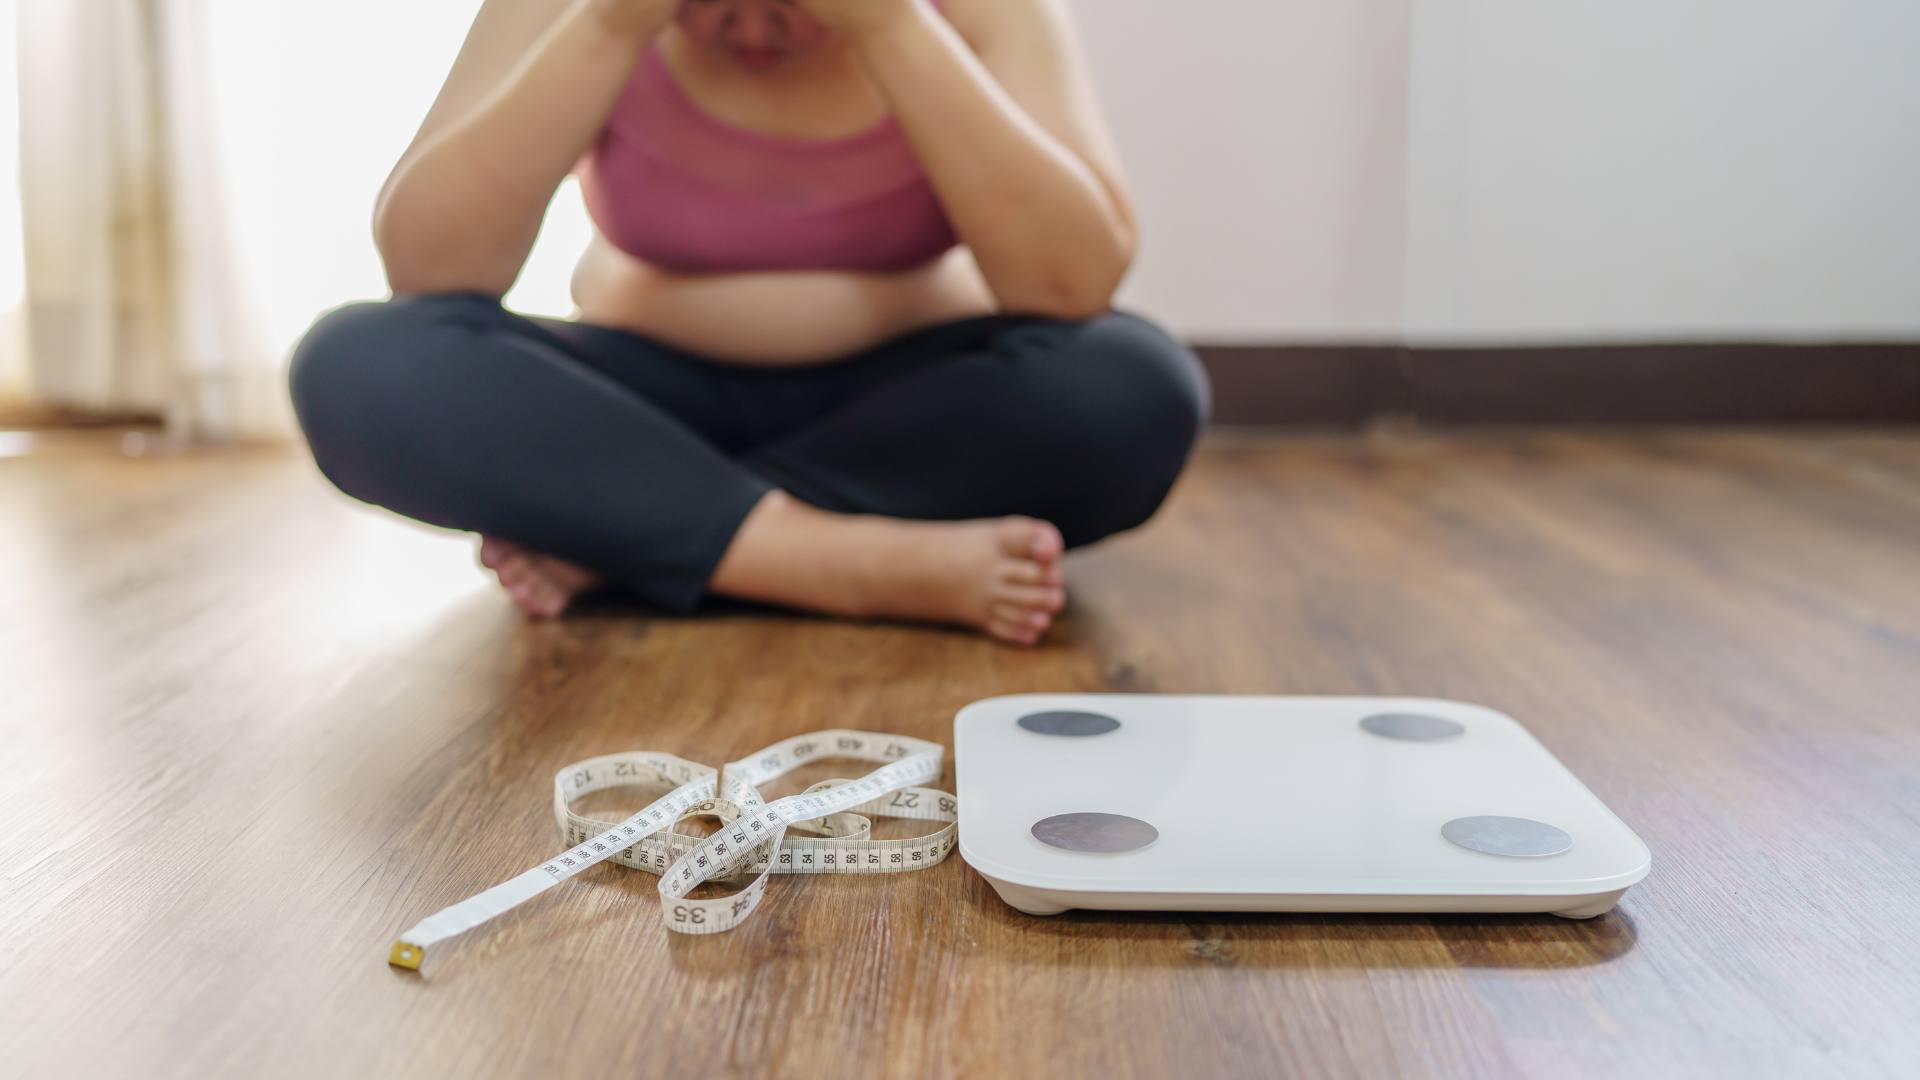 A women sits cross legged with her head in her hands. In front of her is a scale and a measuring tape. This is demonstrating why we gain weight.